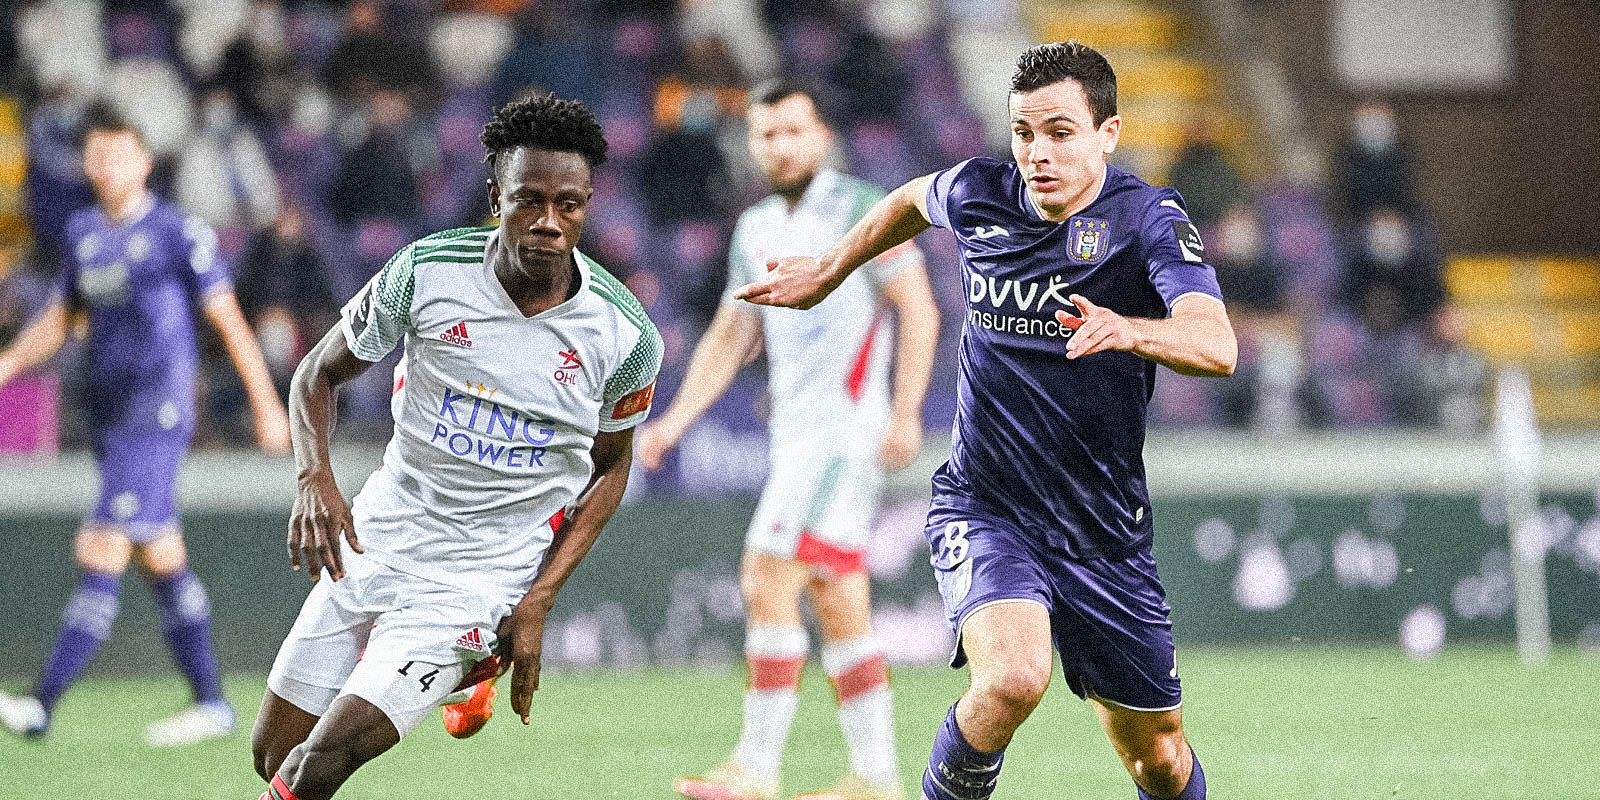 OHL's Xavier Mercier and Anderlecht's Josh Cullen fight for the